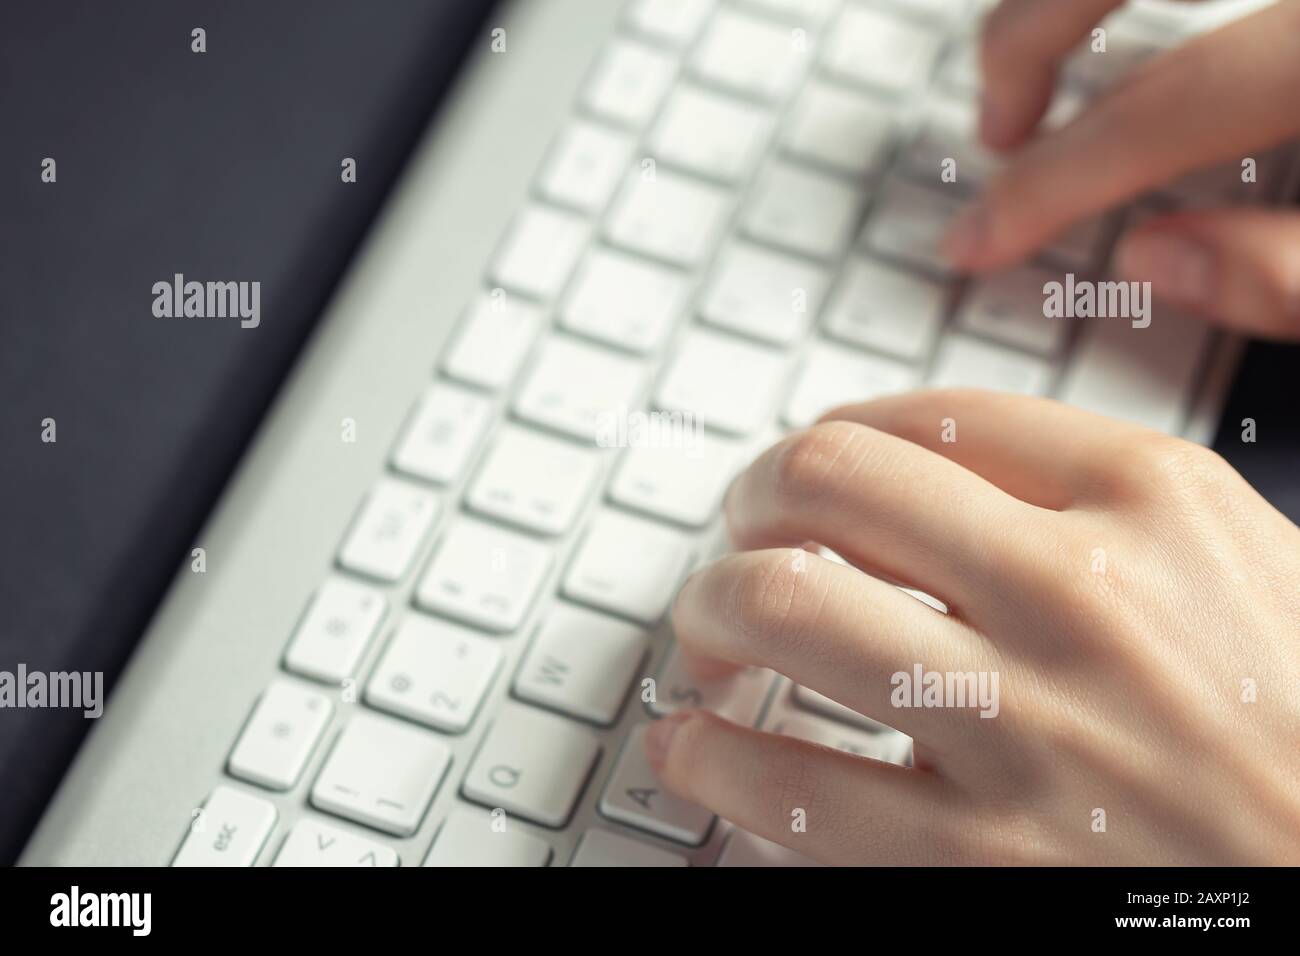 Girl works at home at the computer. Female hands are typing on the keyboard, close up. Stock Photo